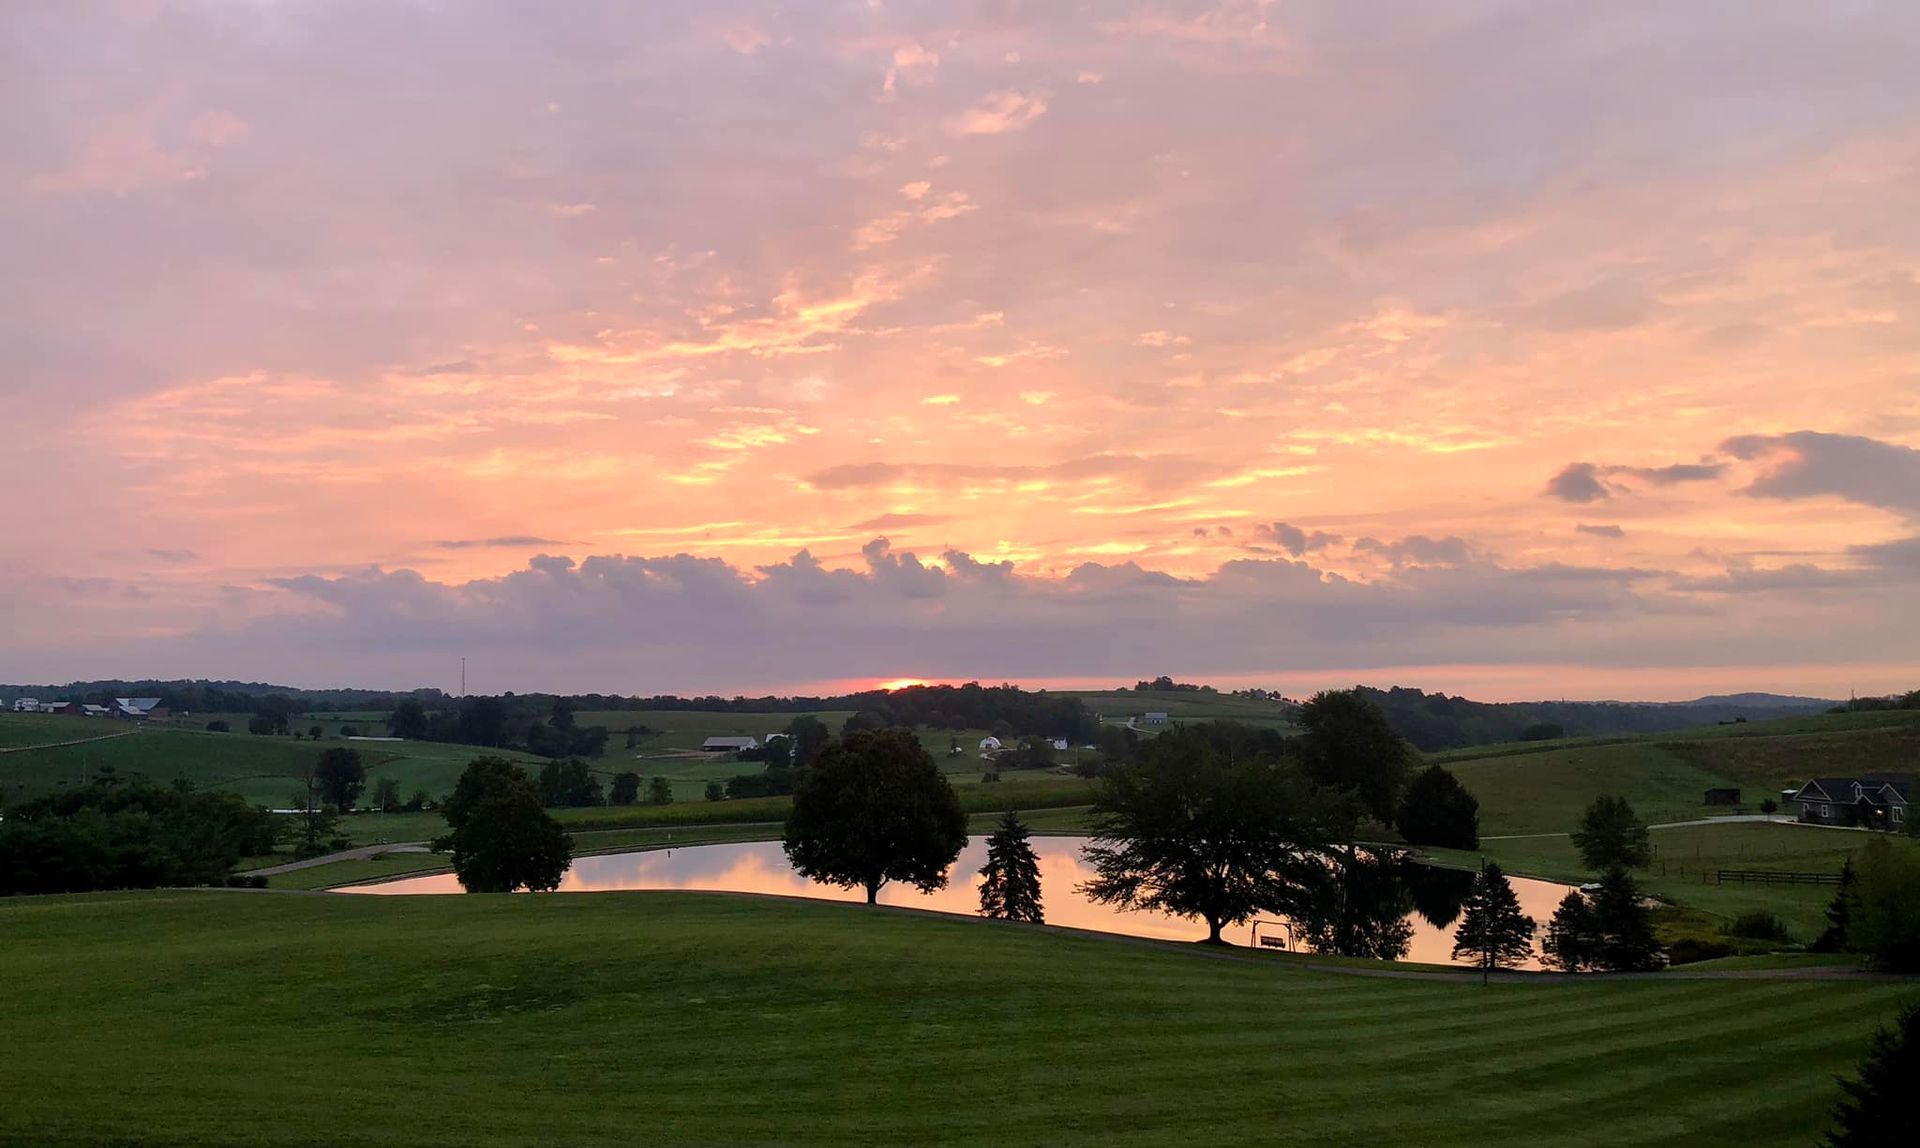 Choose your favorite pond image and you could win a 1-night stay at our lodge in Amish Country Ohio!